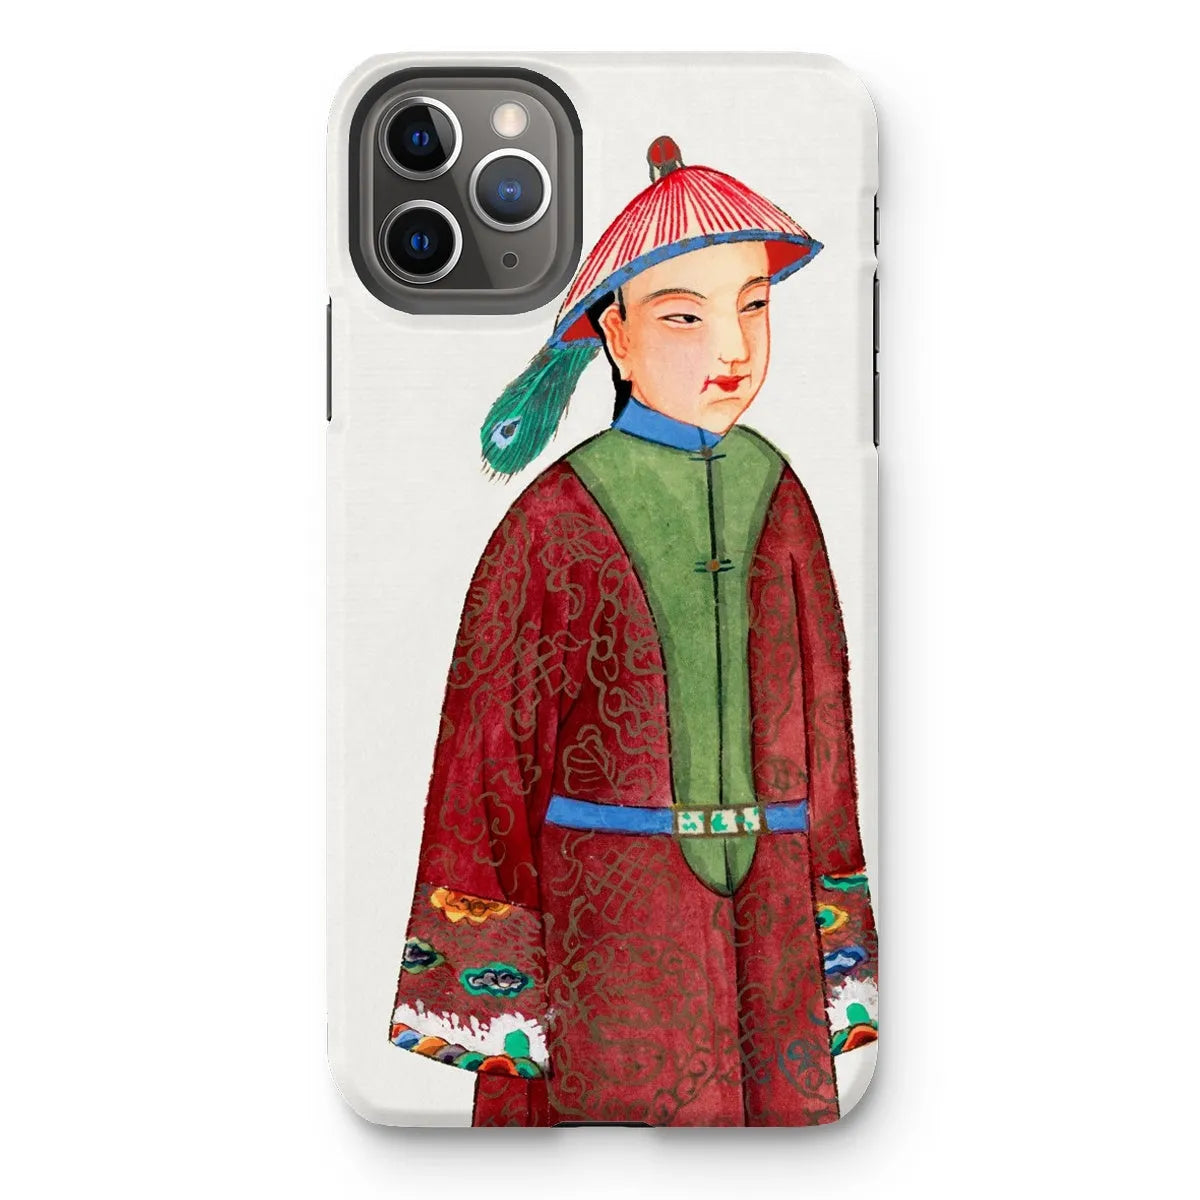 Manchu Dandy - Chinese Aesthetic Art Phone Case - Iphone 11 Pro Max / Matte - Mobile Phone Cases - Aesthetic Art